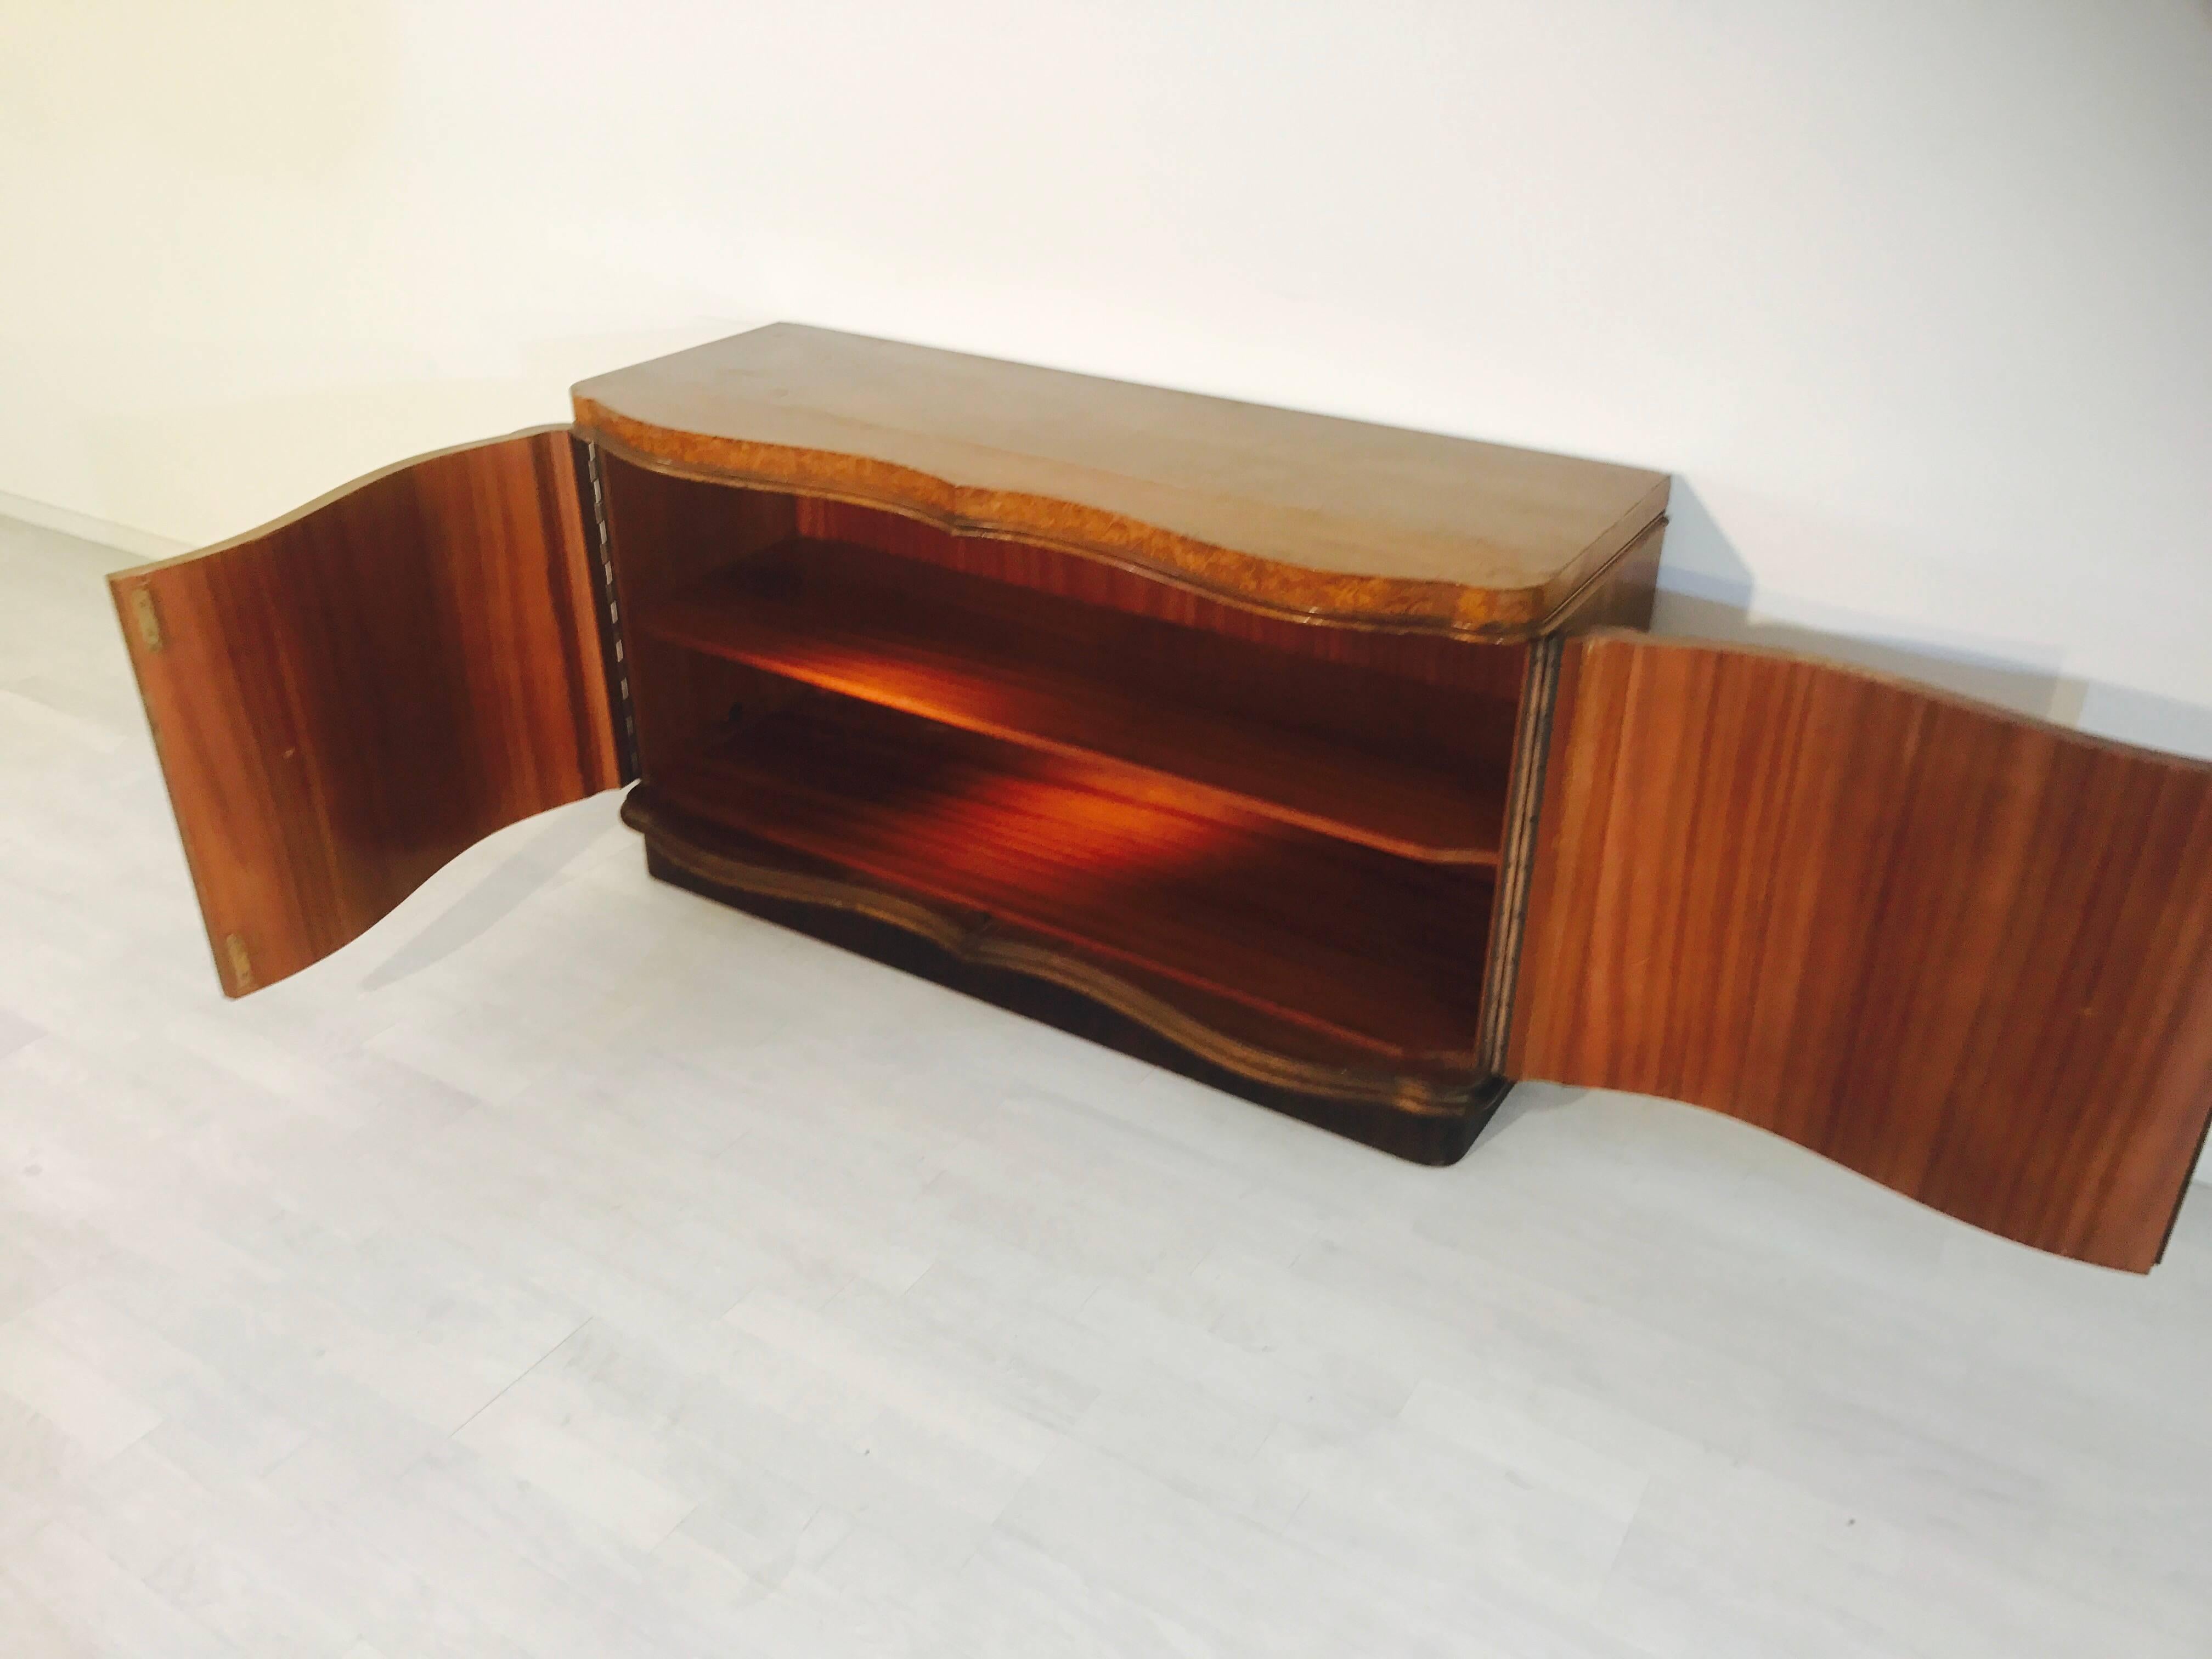 Early 20th Century Art Deco Sideboard Made of Amboyna Rootwood